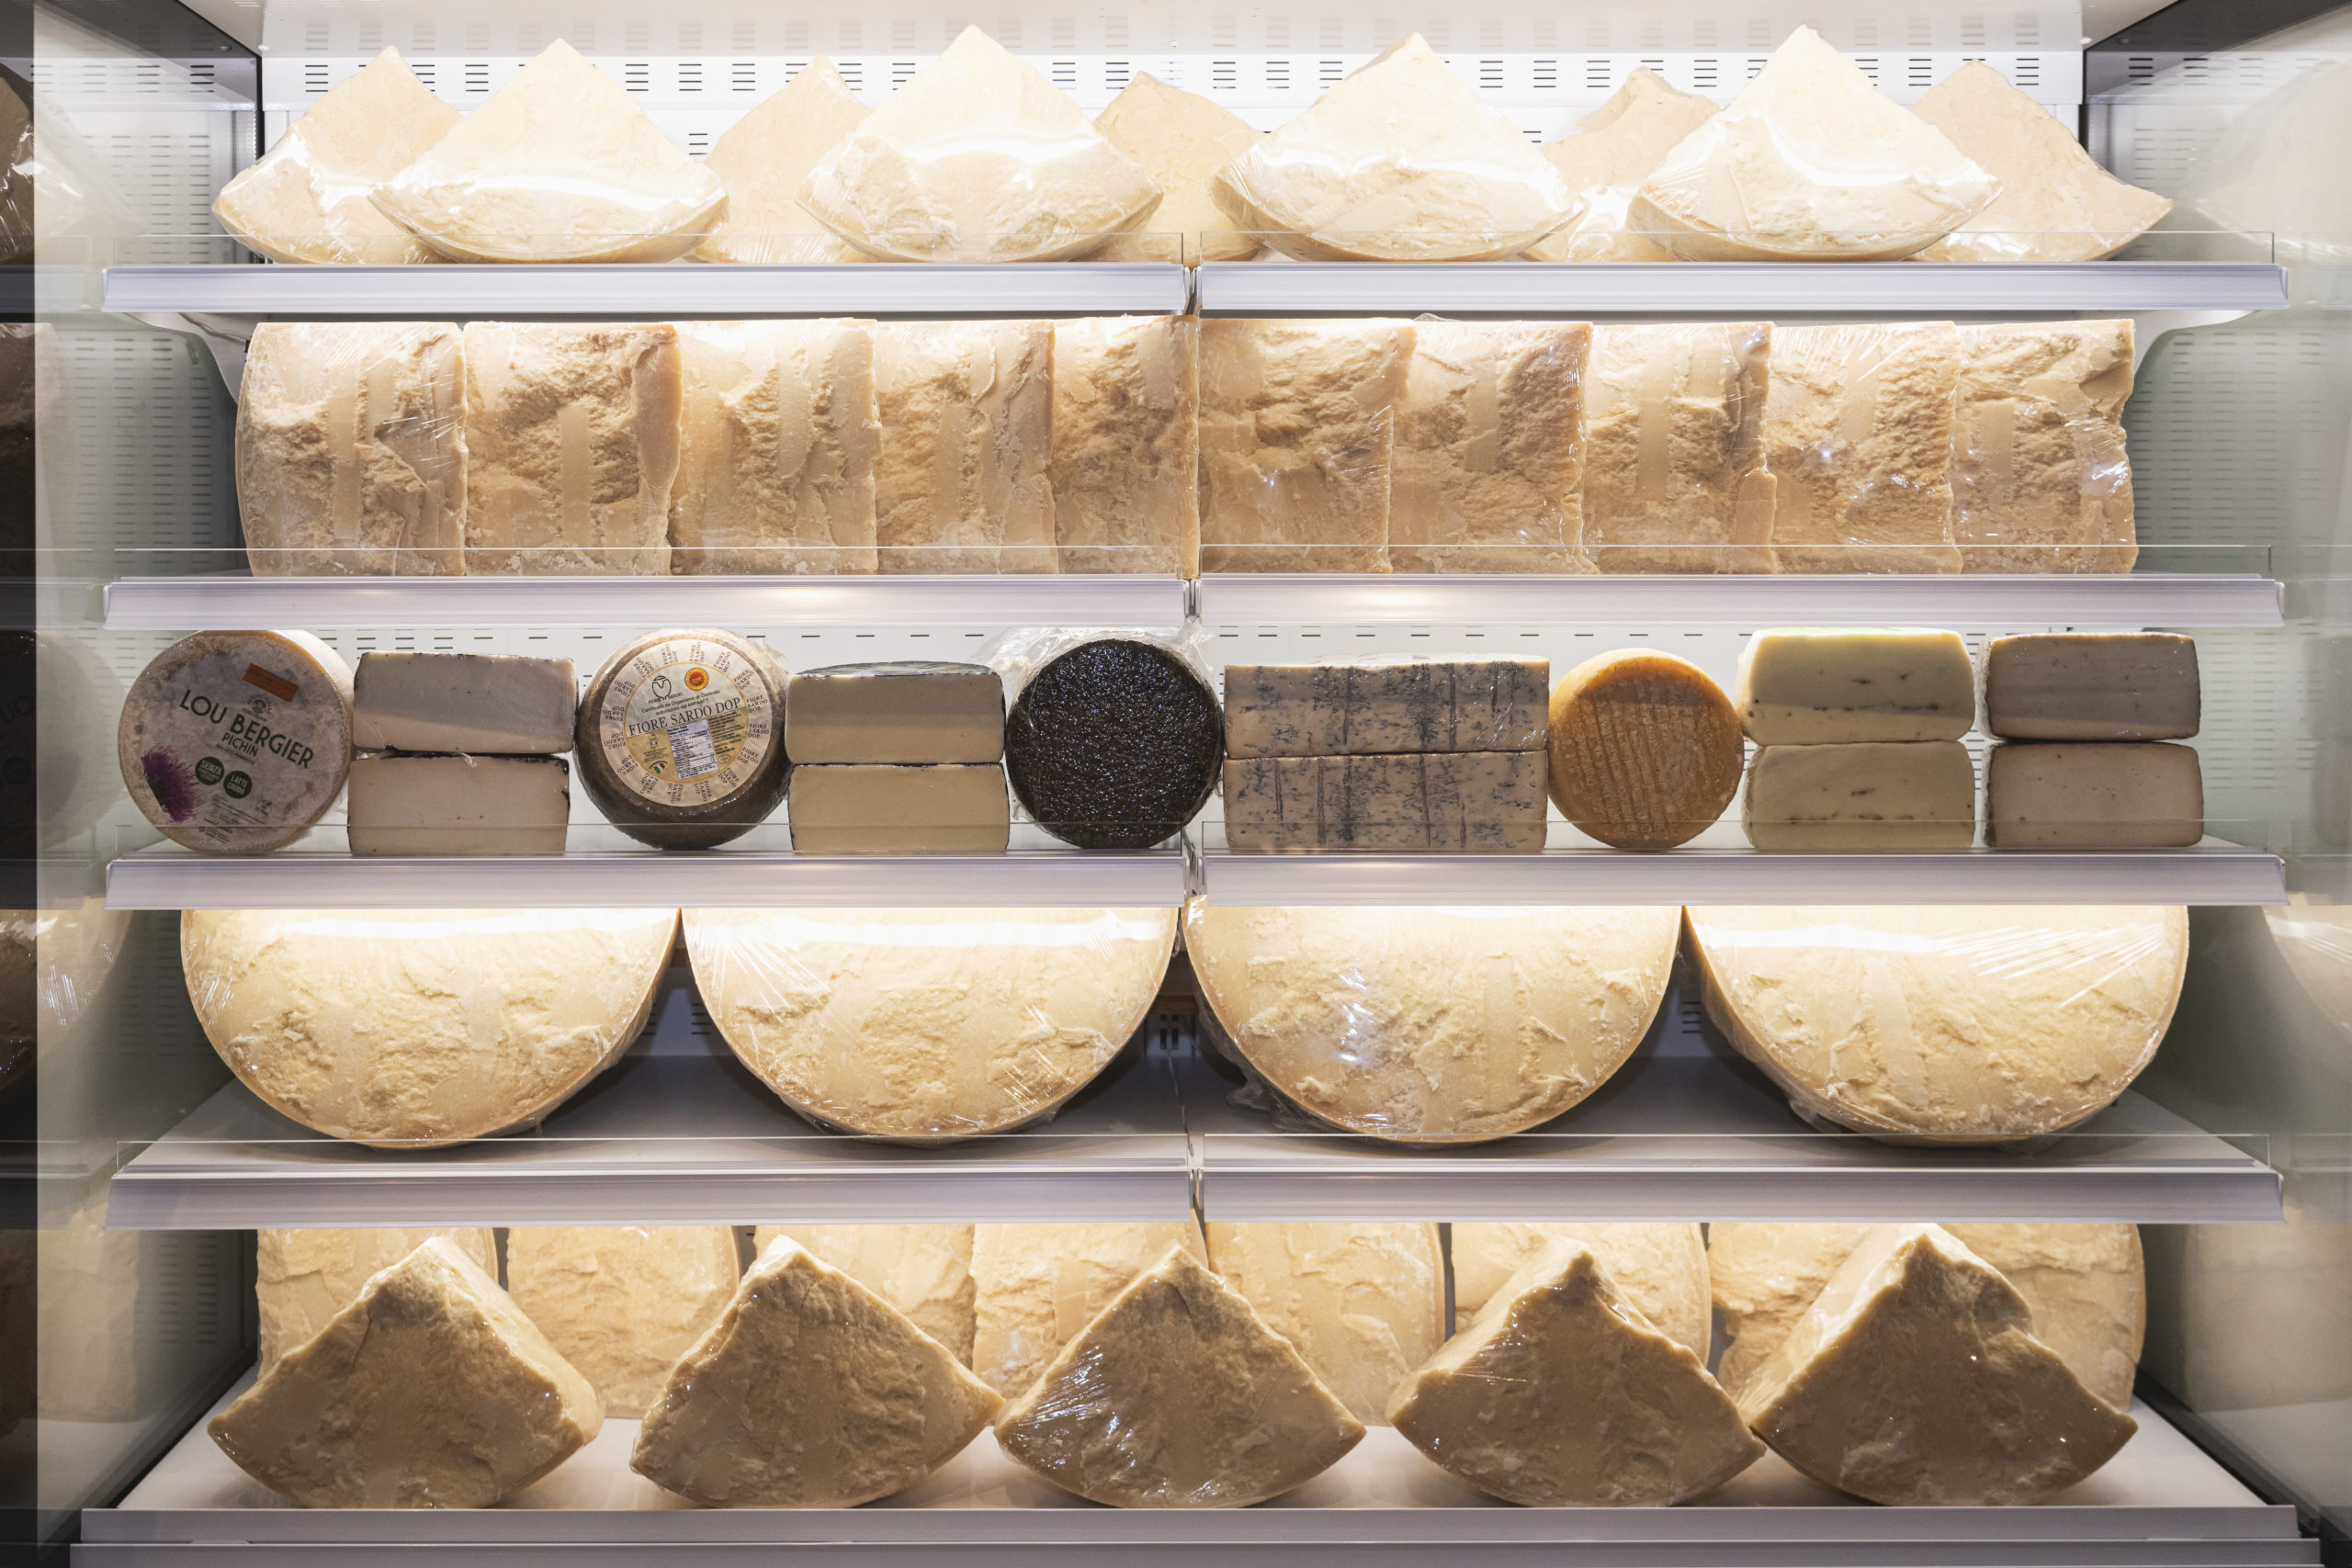 The cheese fridge at Eataly is stocked with all kinds of Italian-imported products